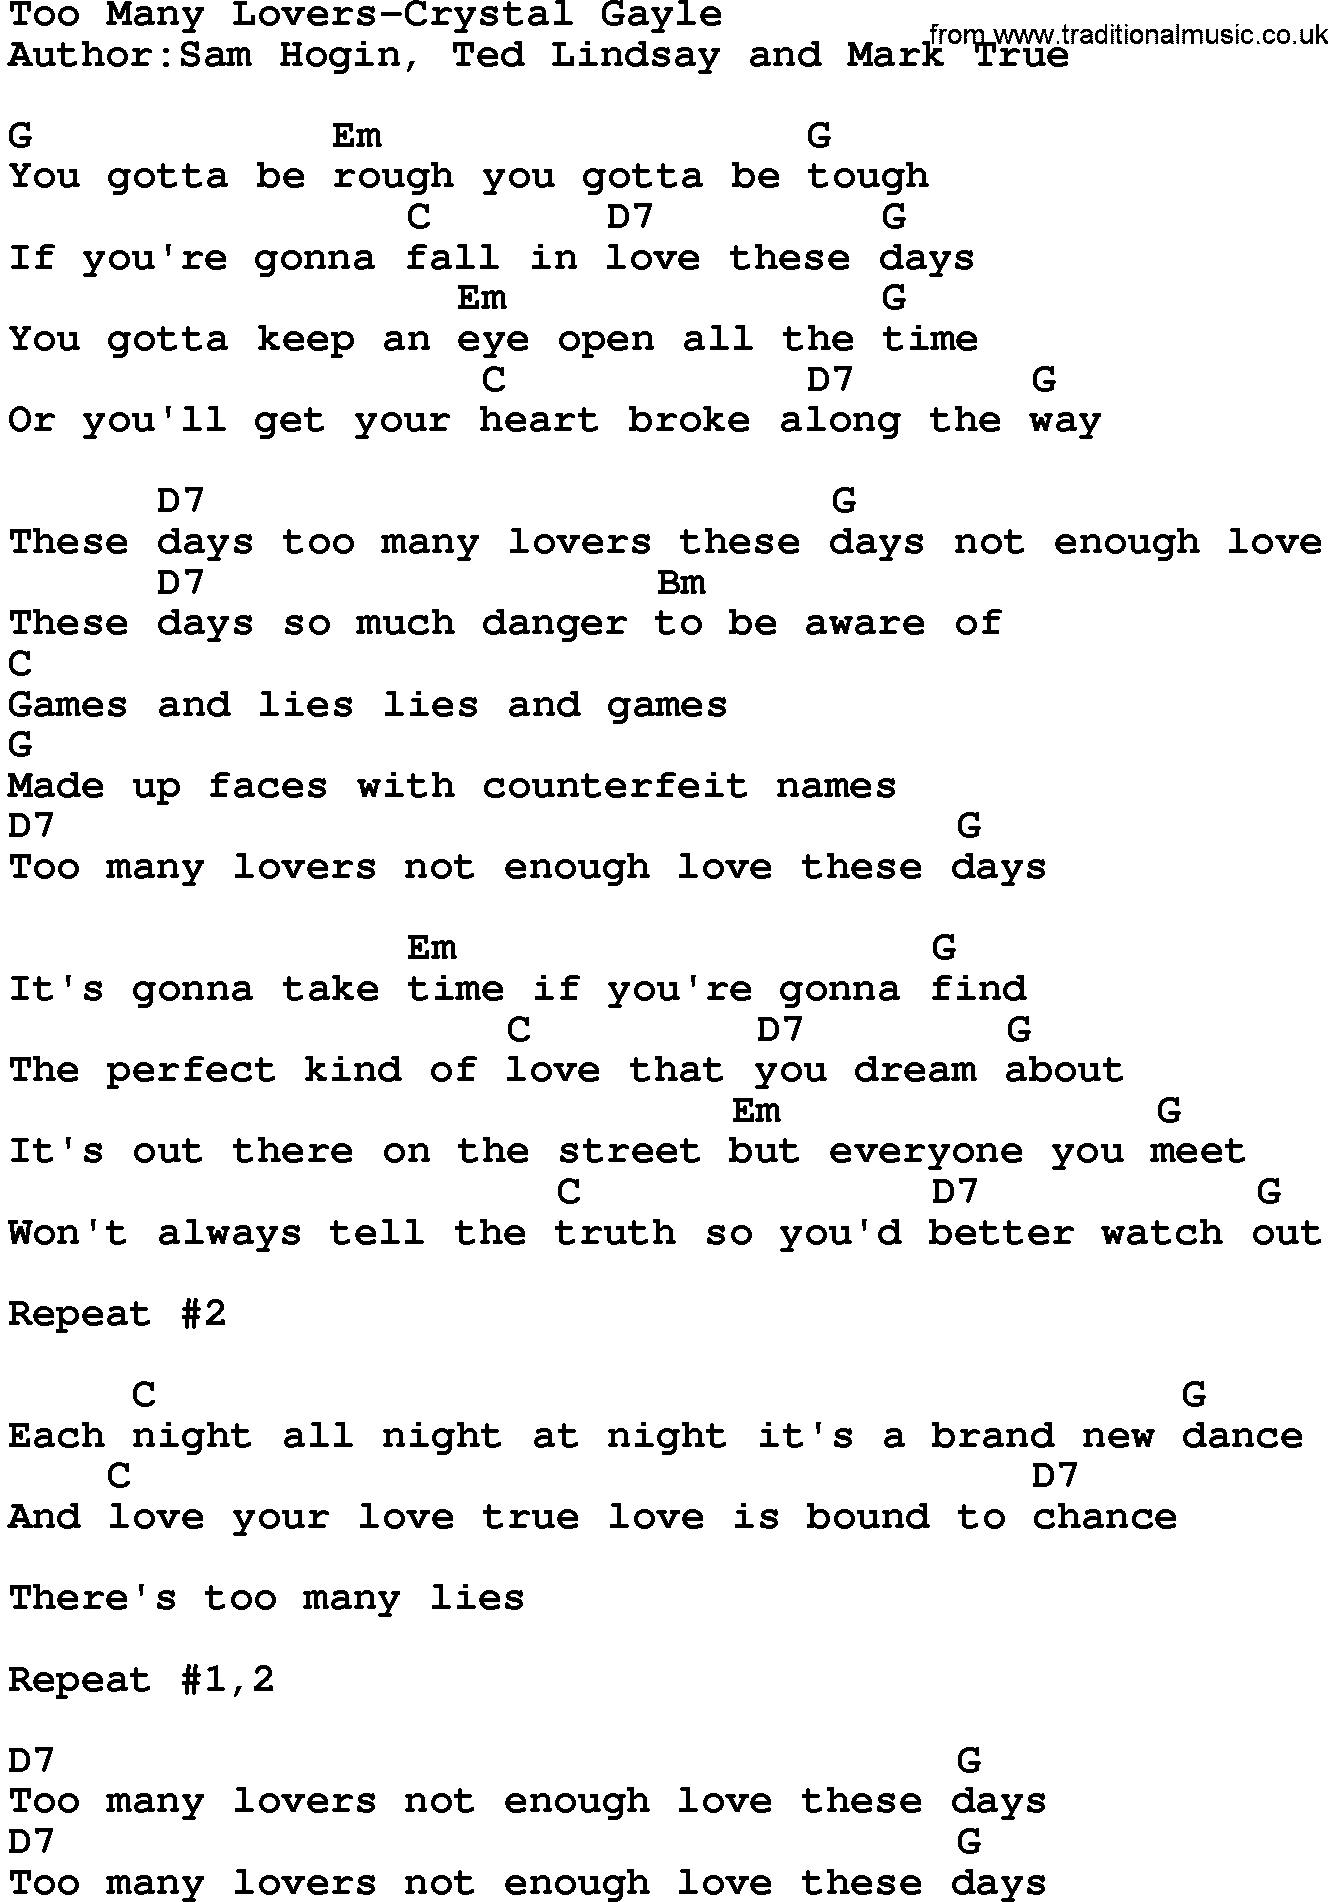 Country music song: Too Many Lovers-Crystal Gayle lyrics and chords